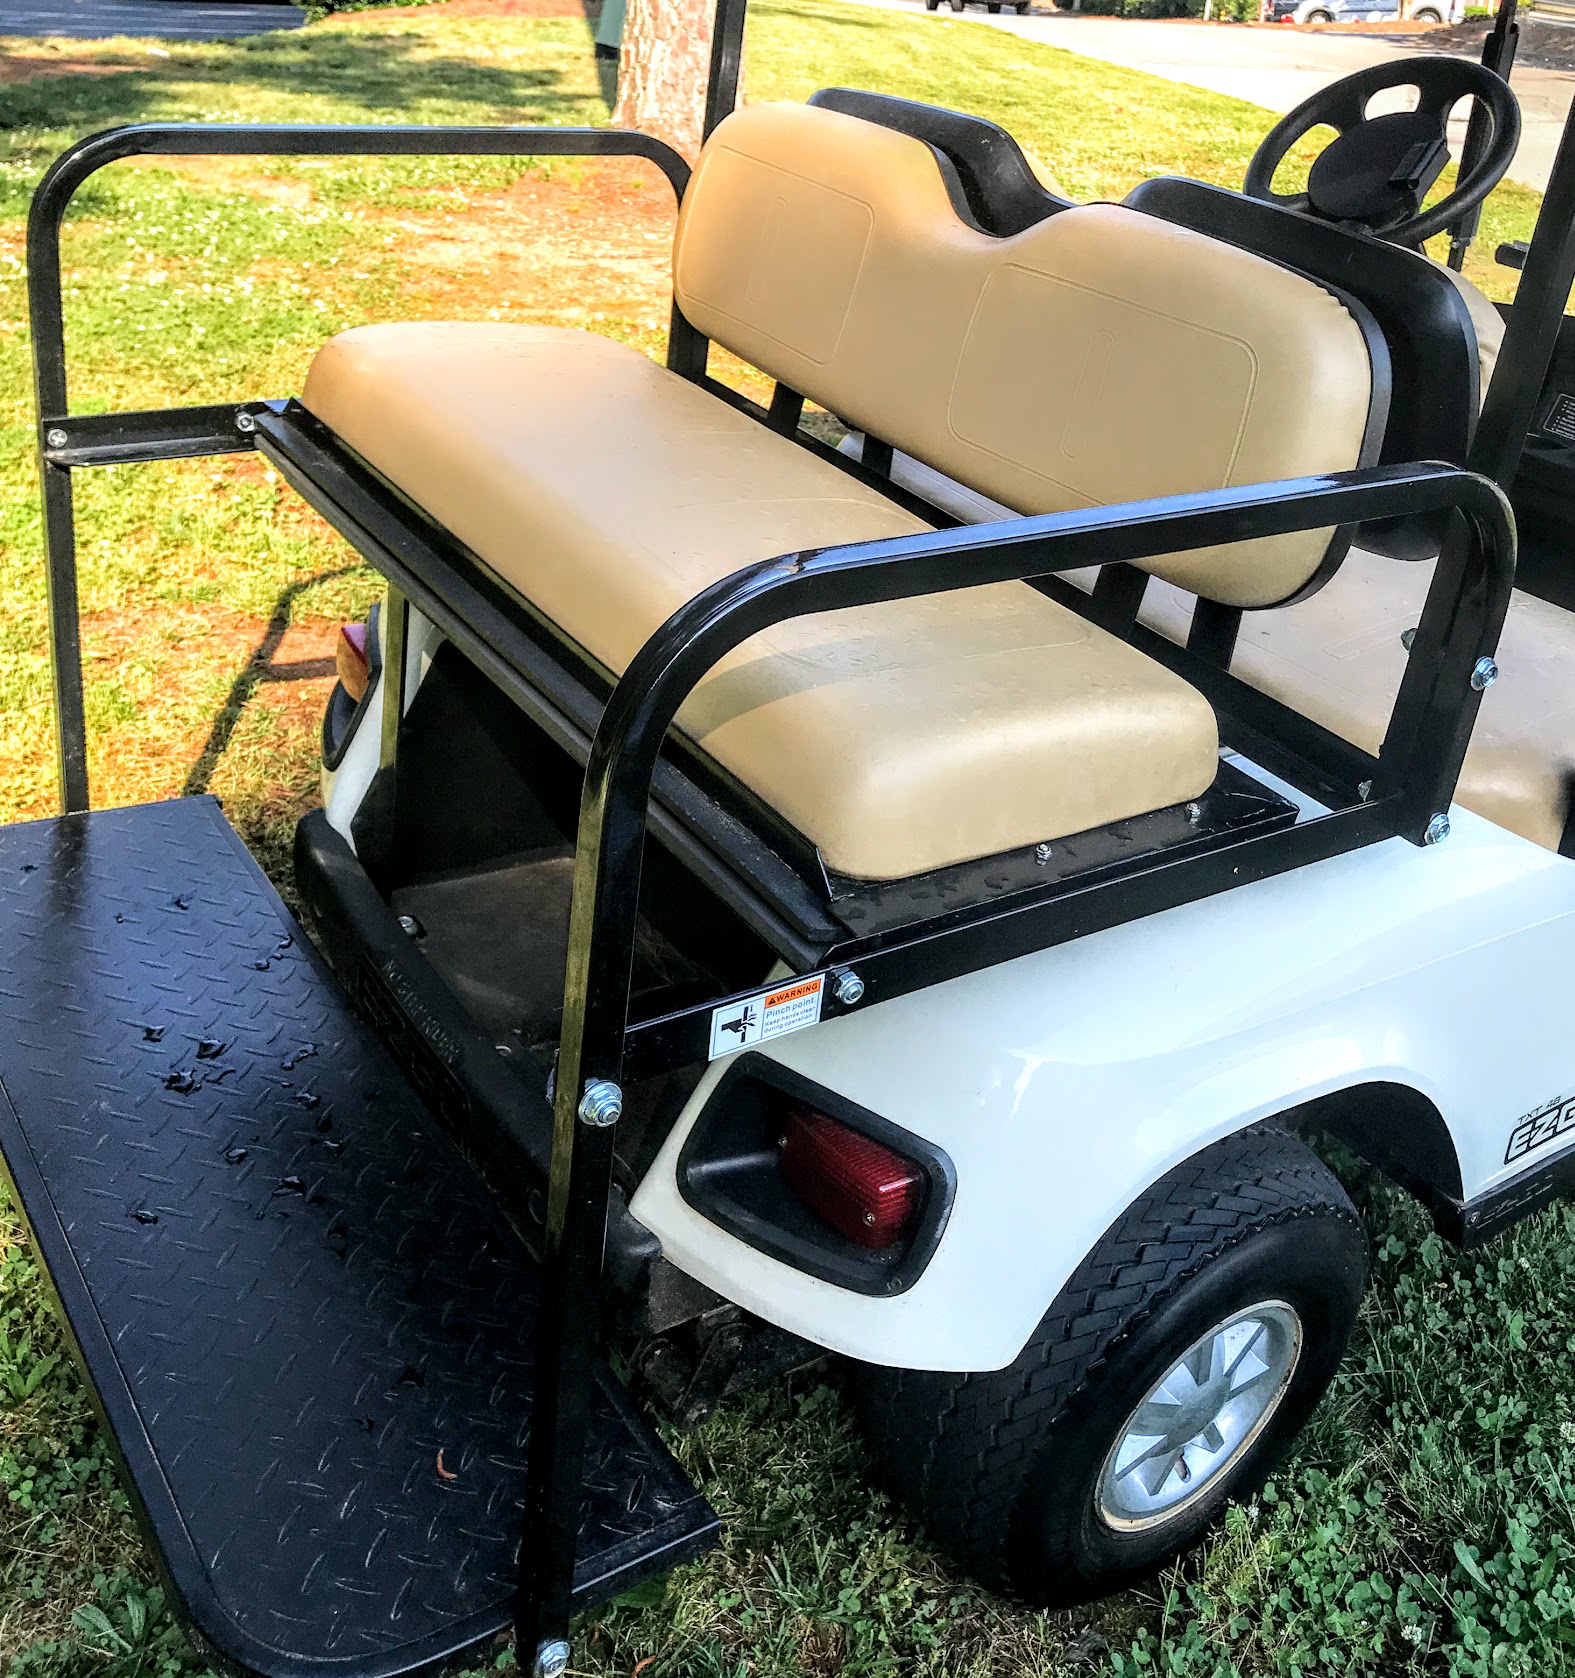 4 Seat Golf Cart - Make Room for Passengers or for Hauling Stuff